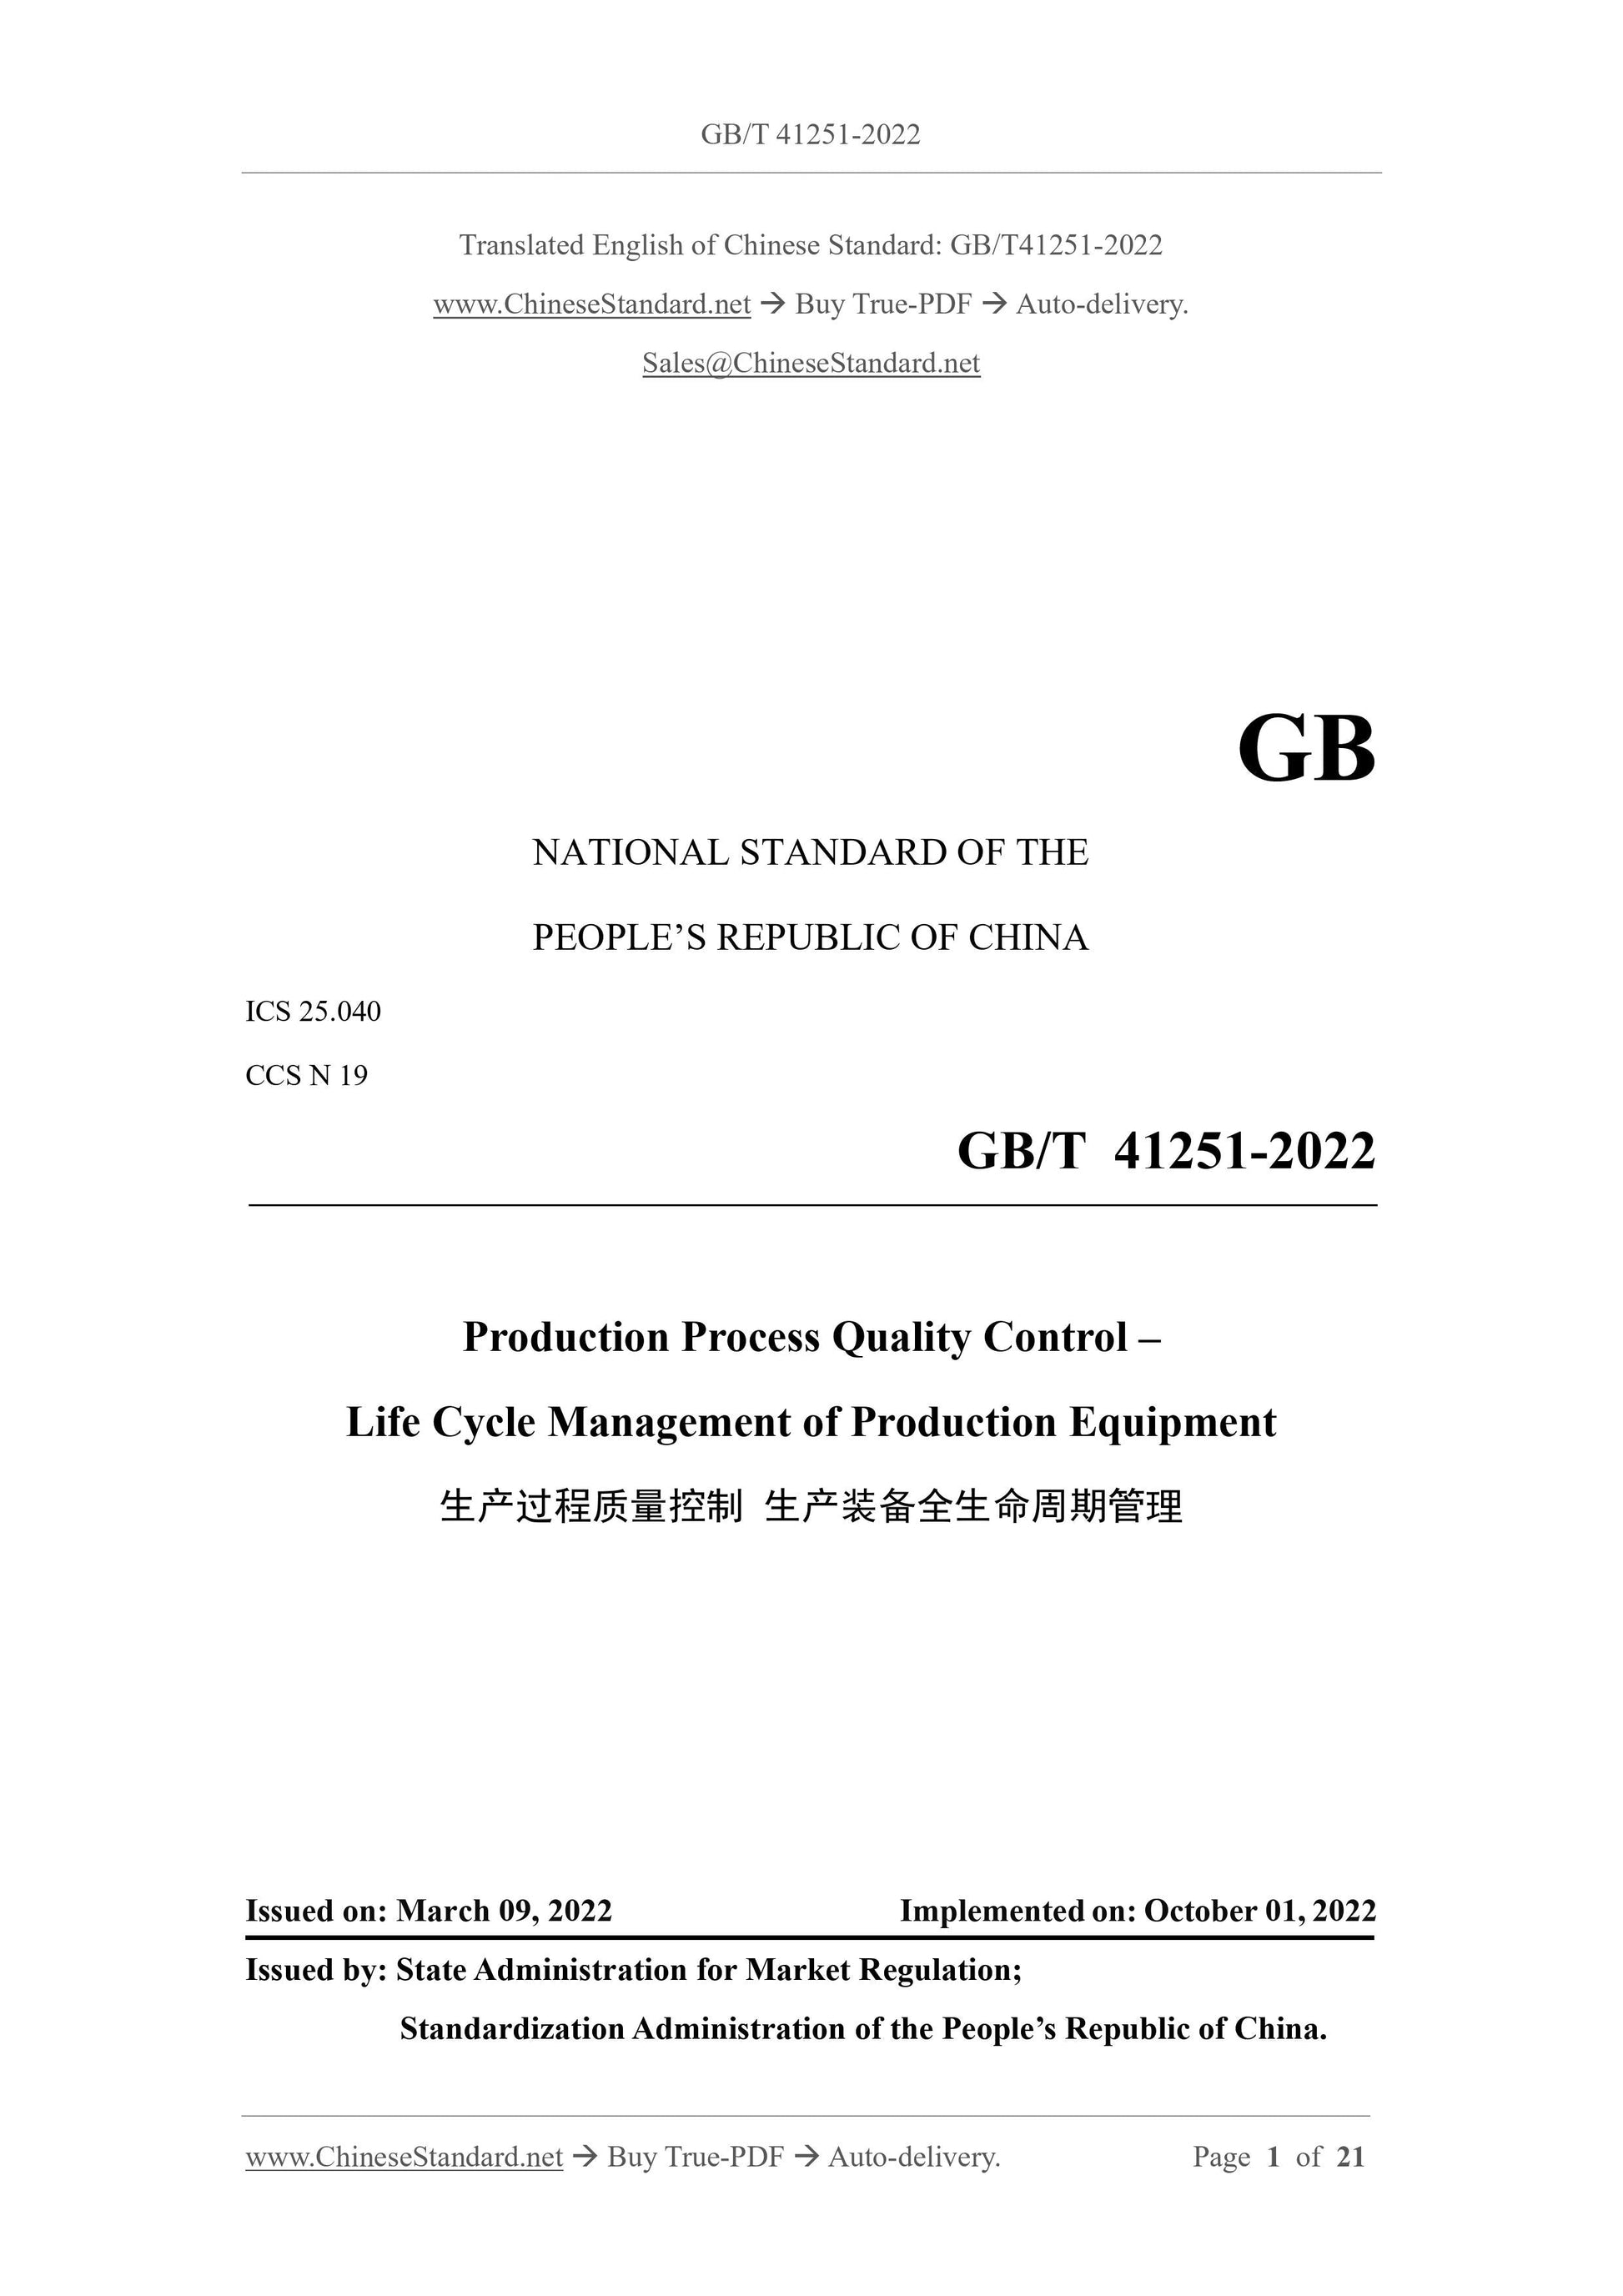 GB/T 41251-2022 Page 1